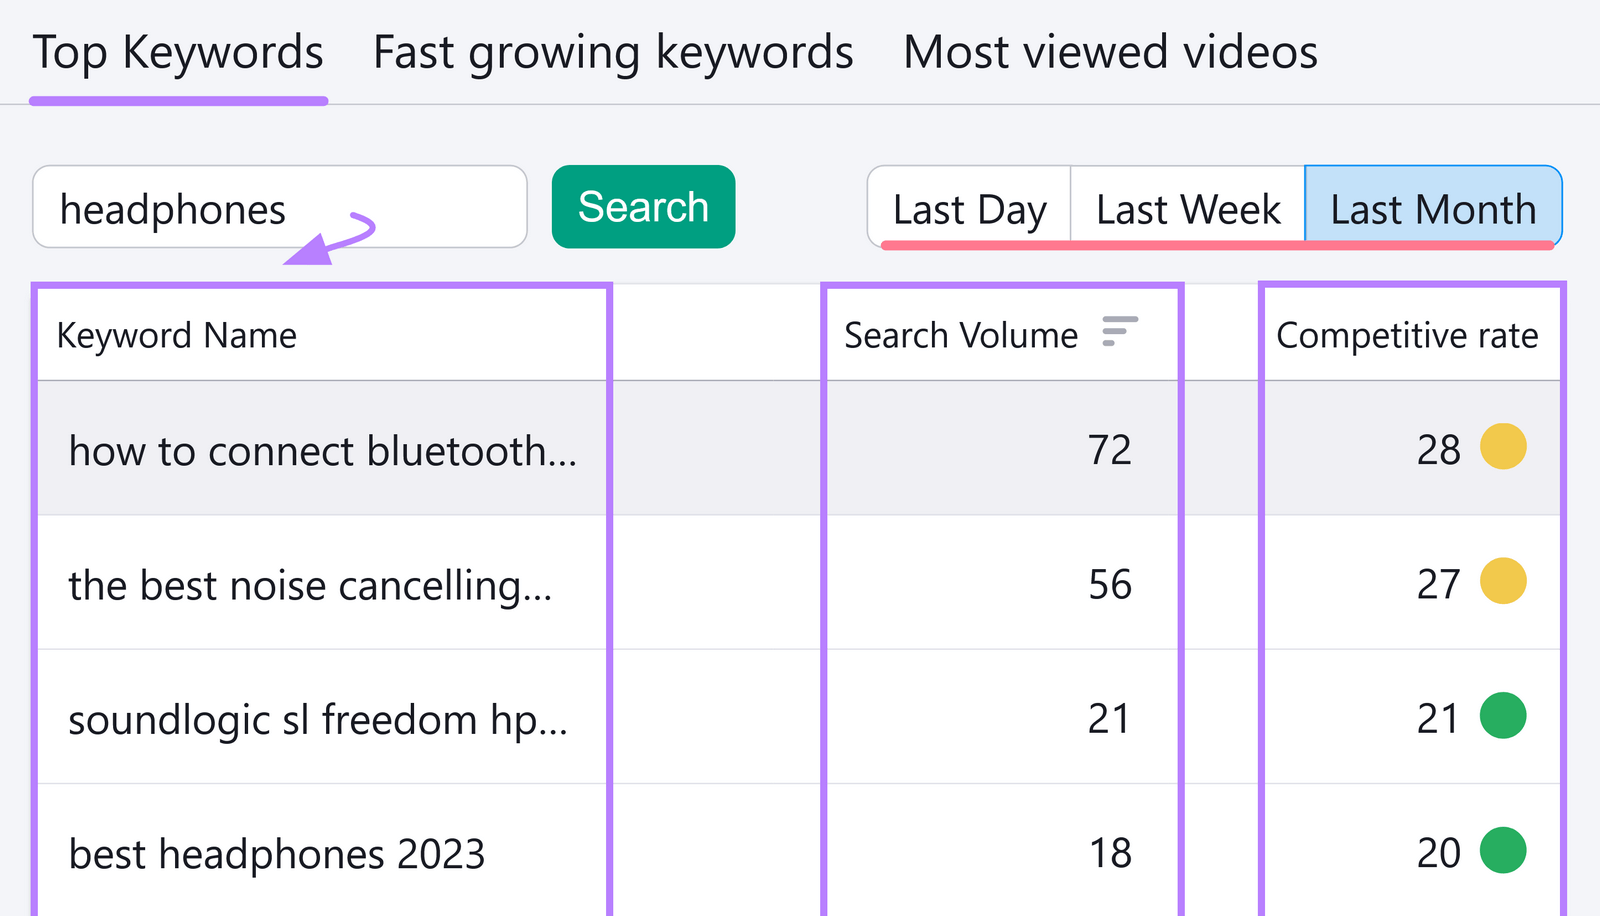 results with YouTube keywords and their “Search Volume” and “Competitive rate